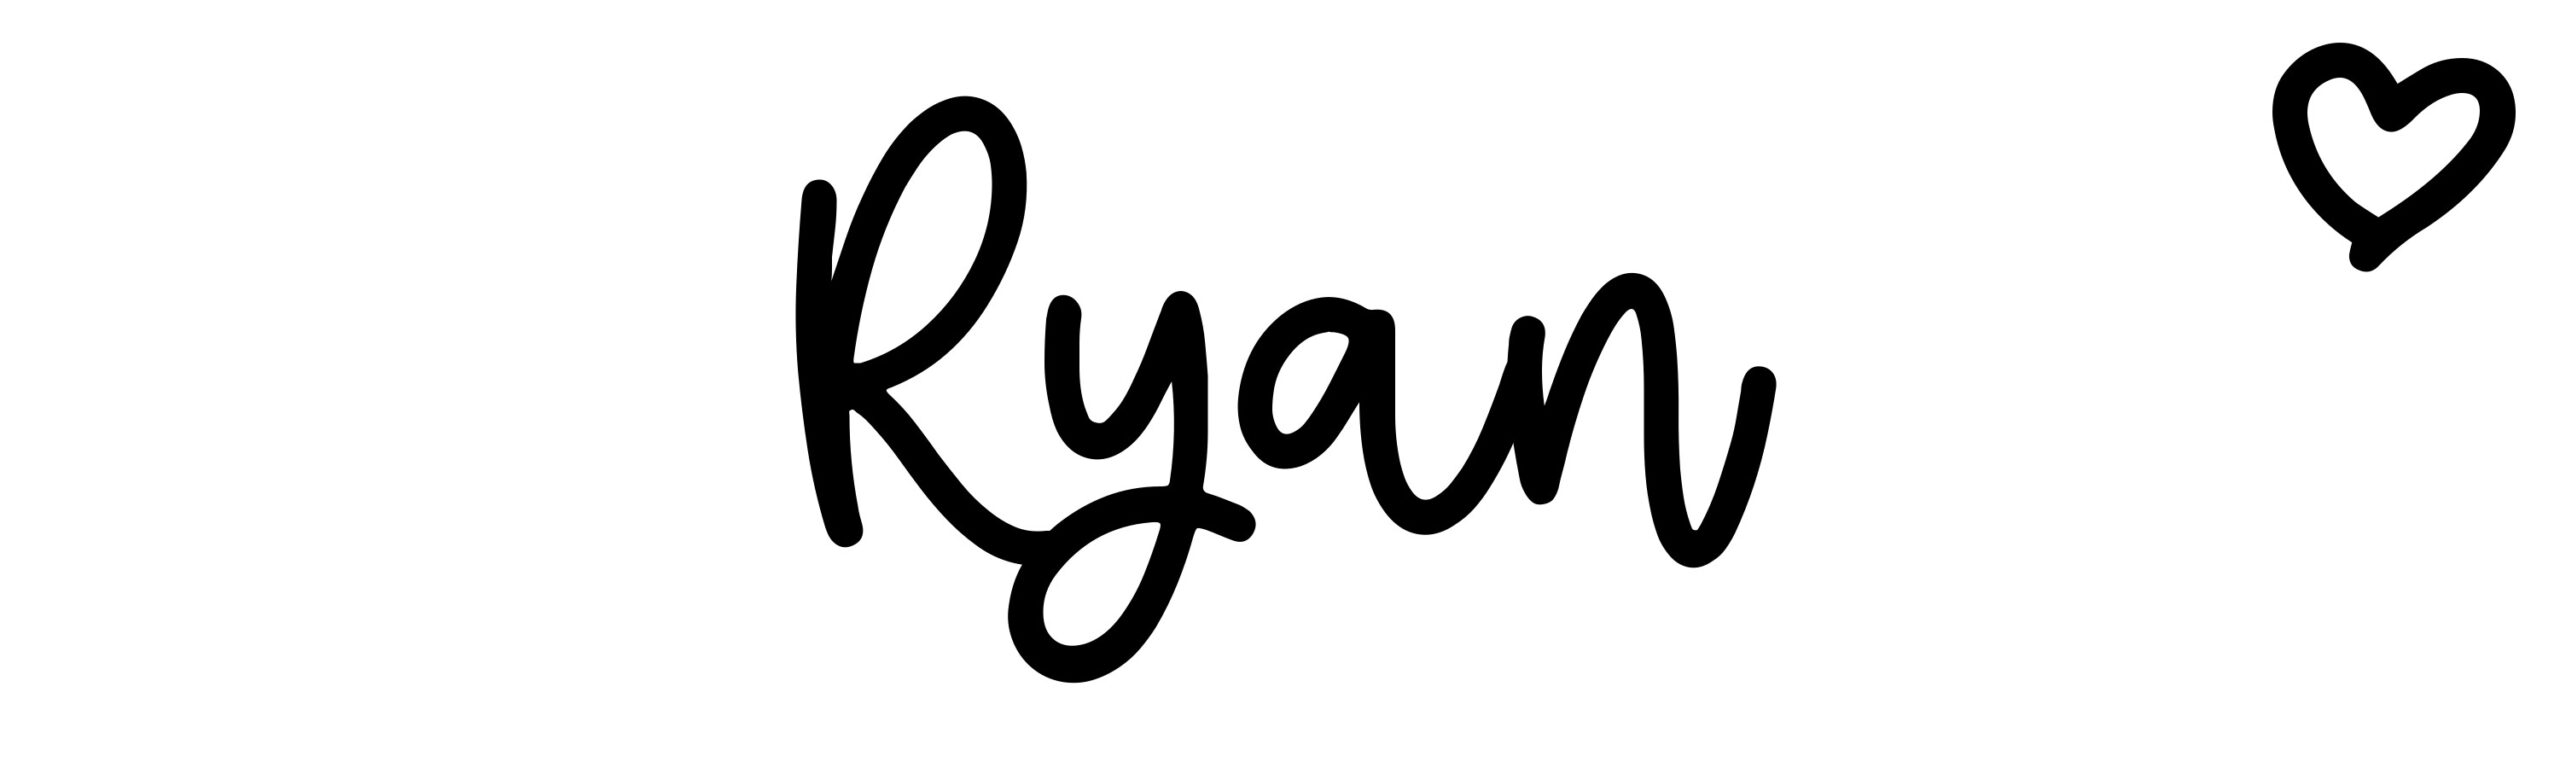 Ryan - Name meaning, origin, variations and more